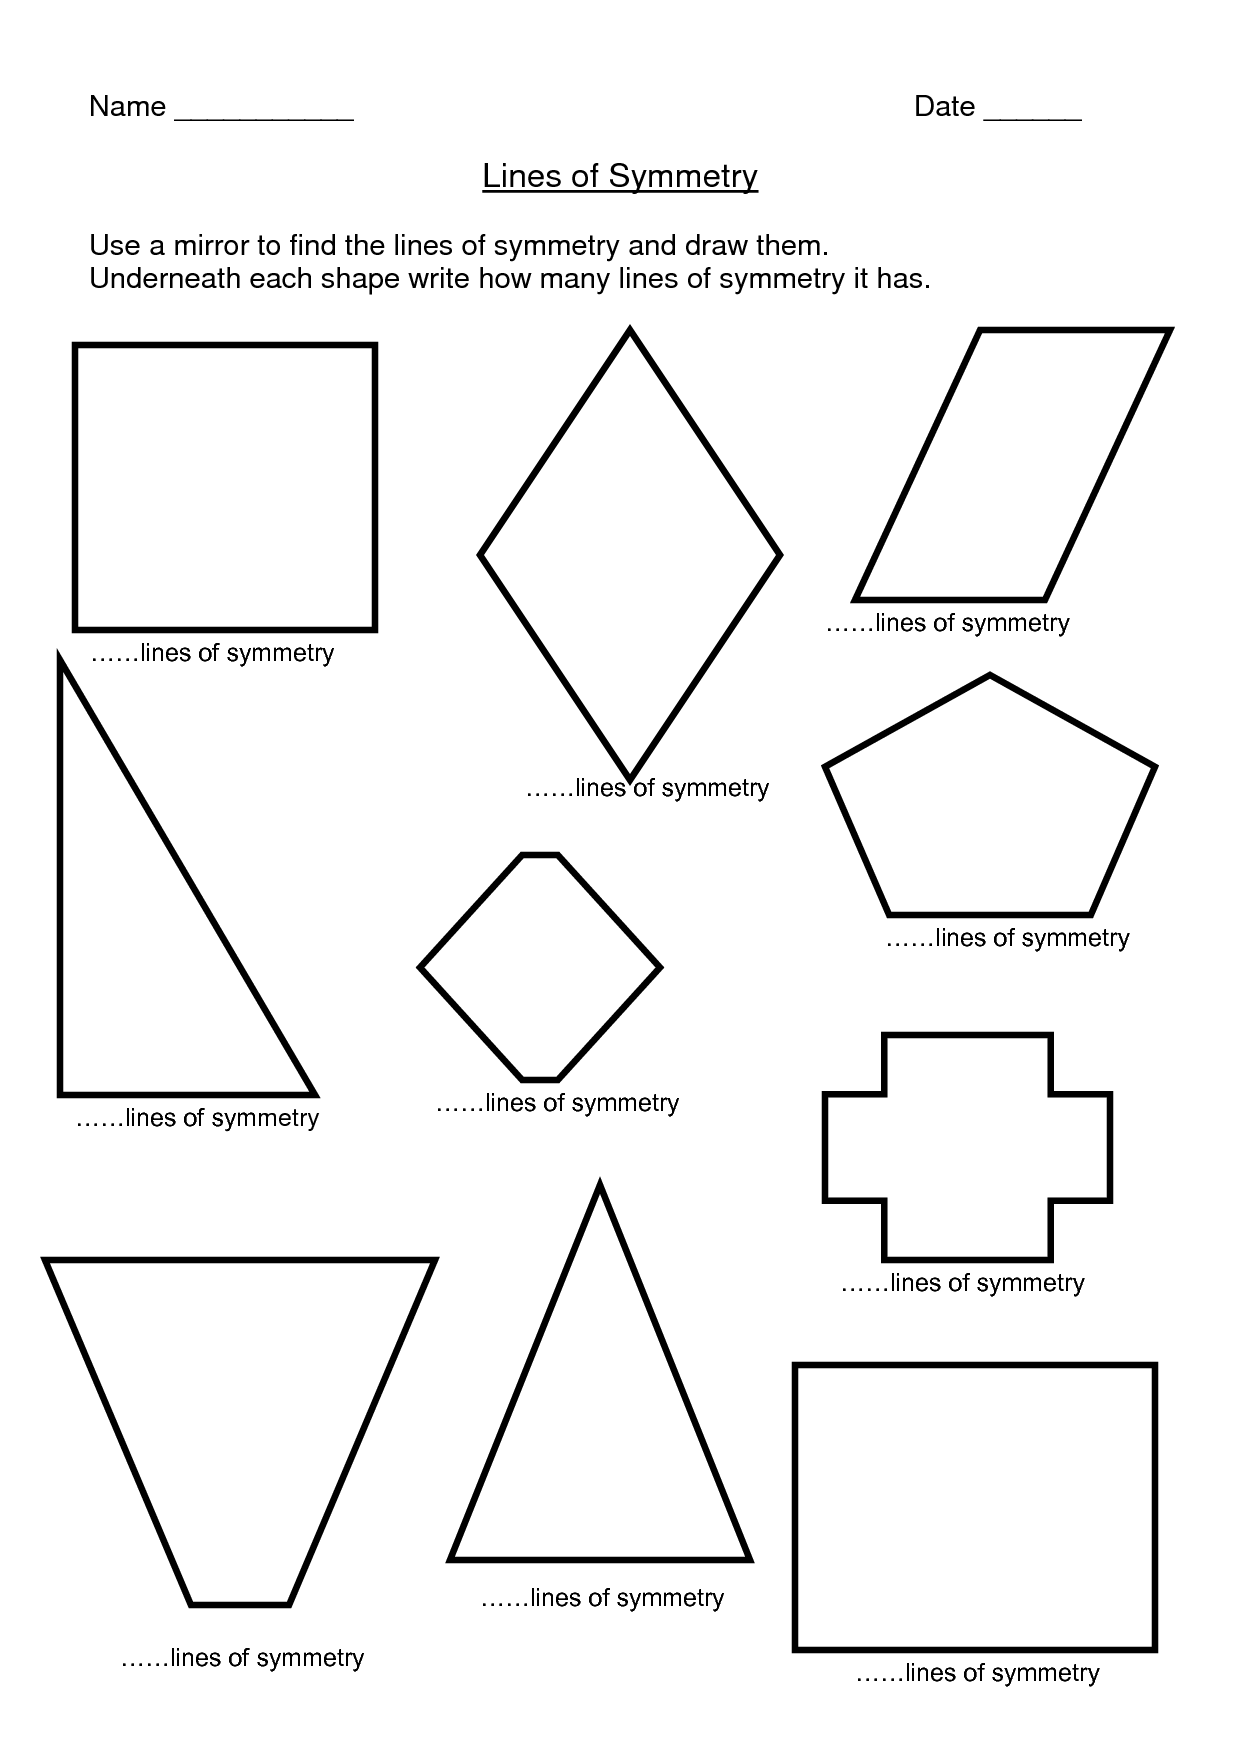 Shapes with Lines of Symmetry Image